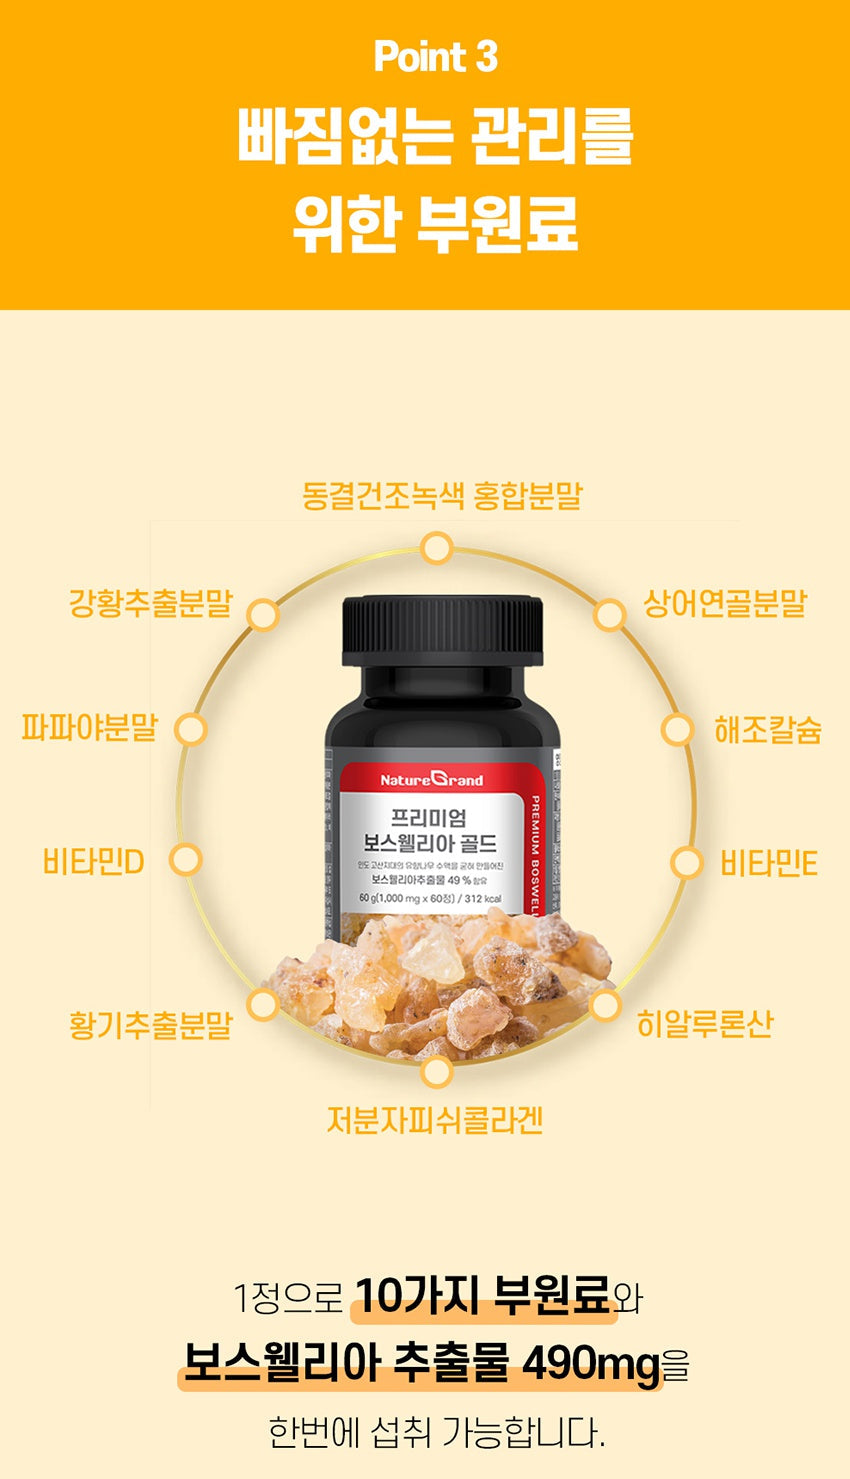 2 Bottles NatureGrand Premium Boswellia 60 Tablets Health Supplements Foods Boswellic acid Parents Gifts Exercise Sports Joints Bones cartilage Muscles